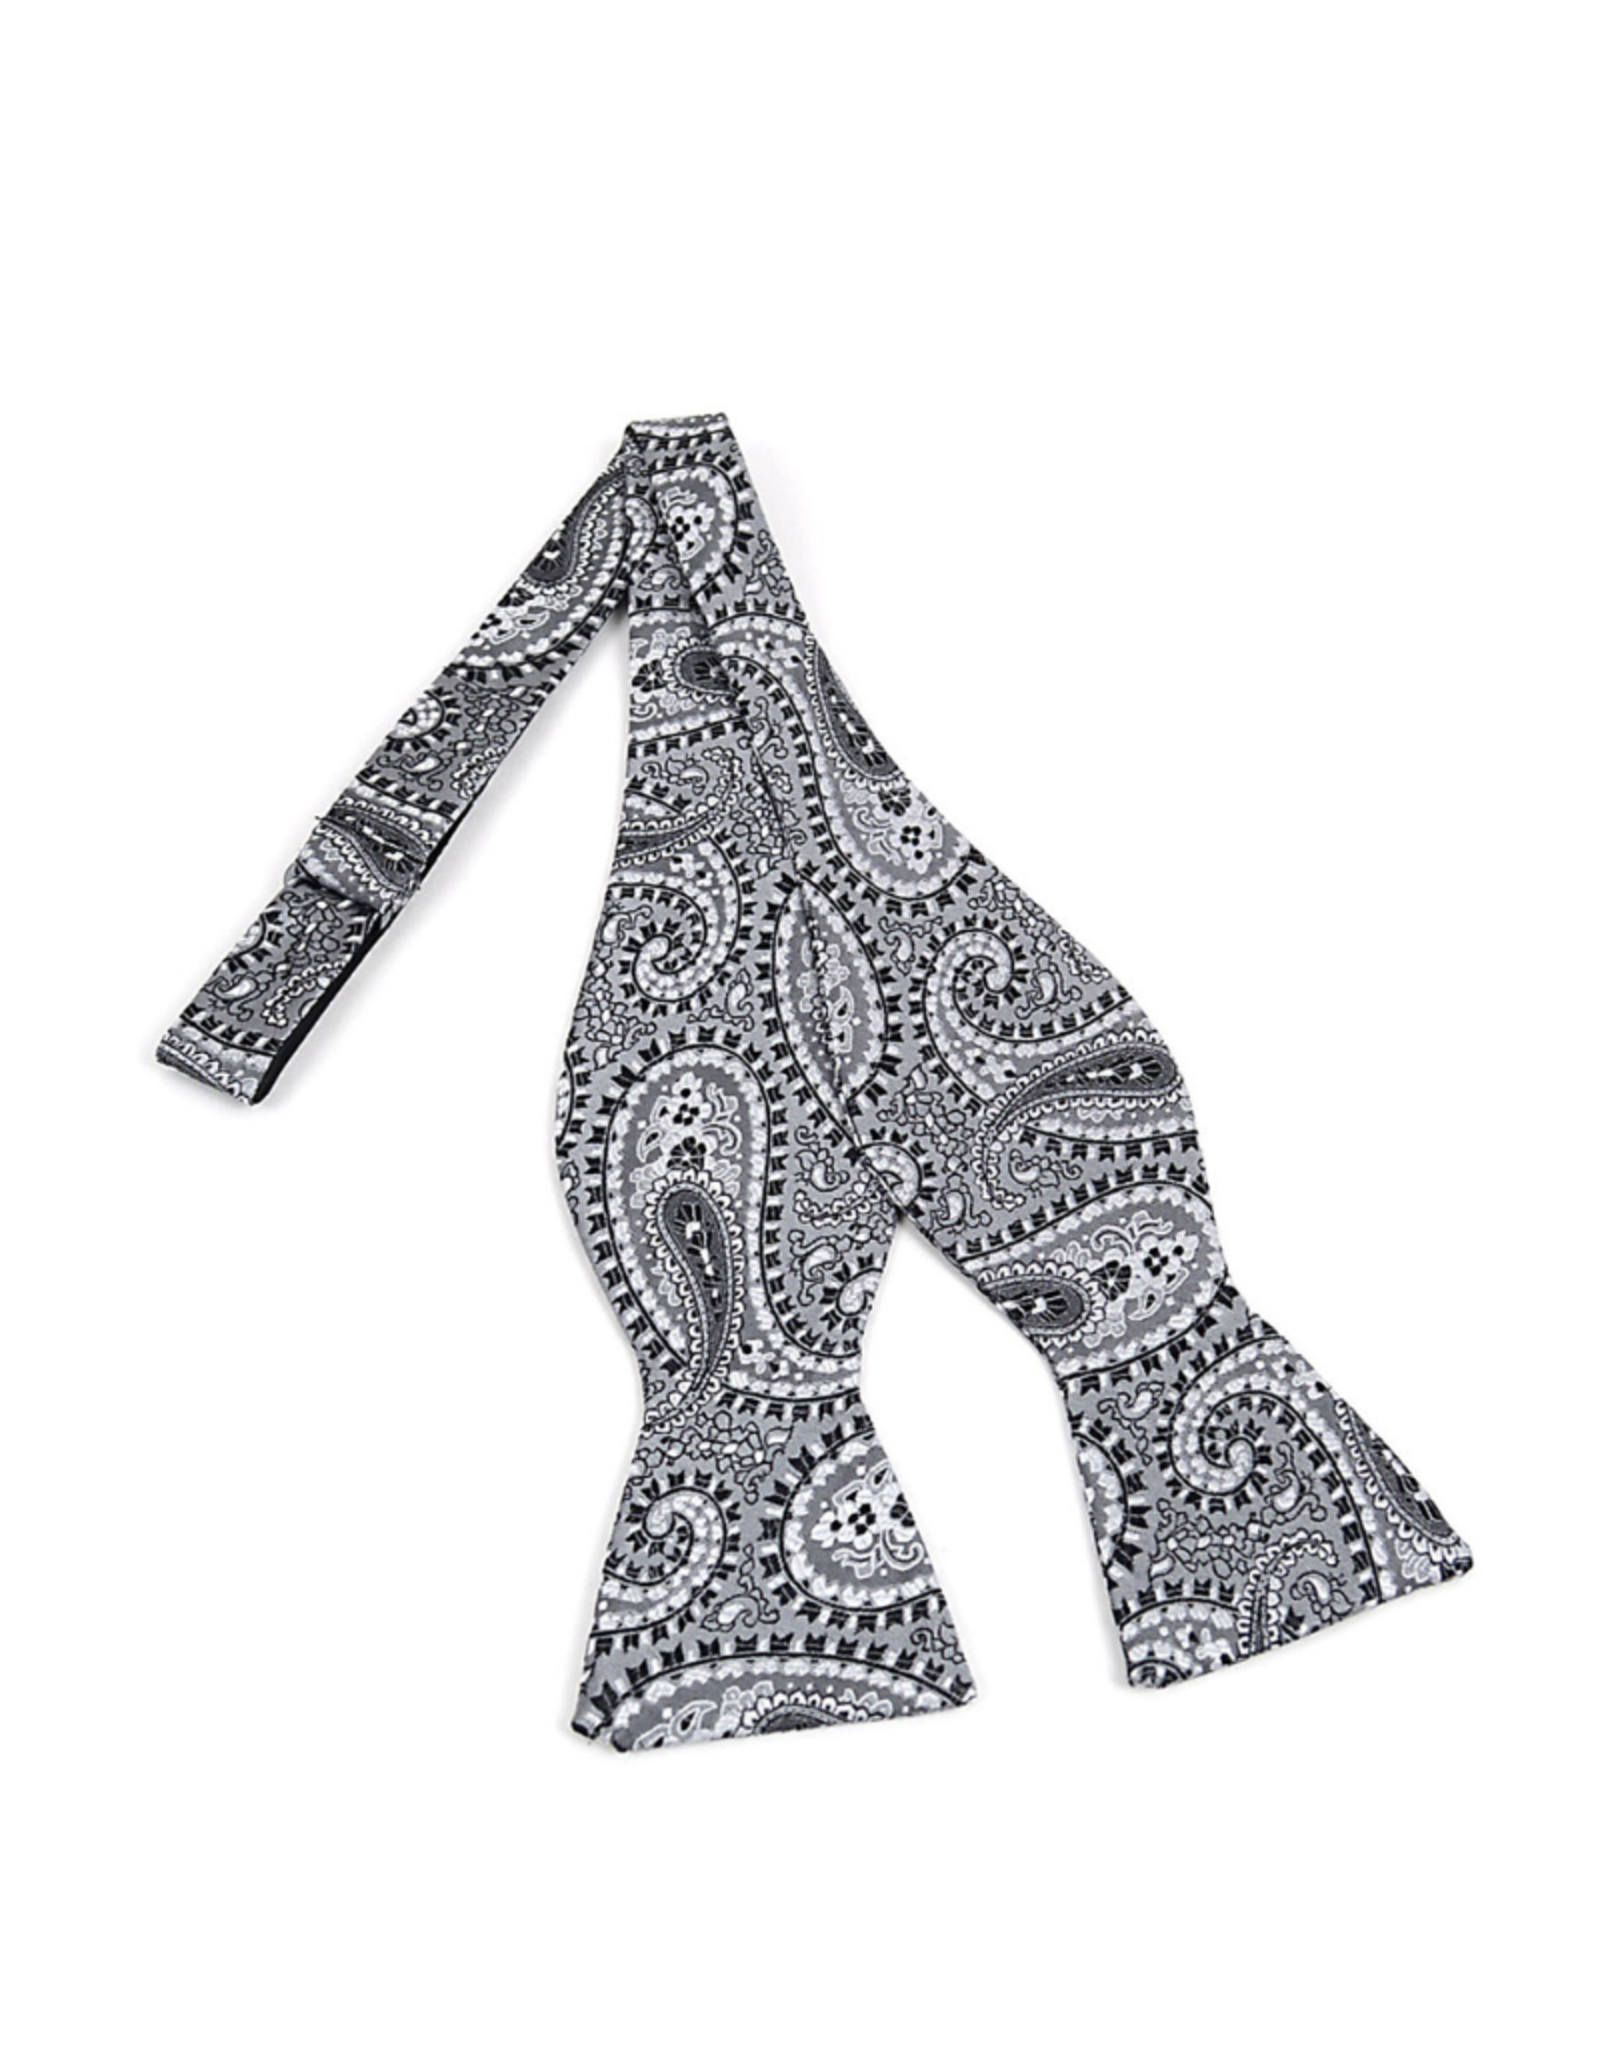 BOW TIE-HAND TIED-WOVEN PAISLEY